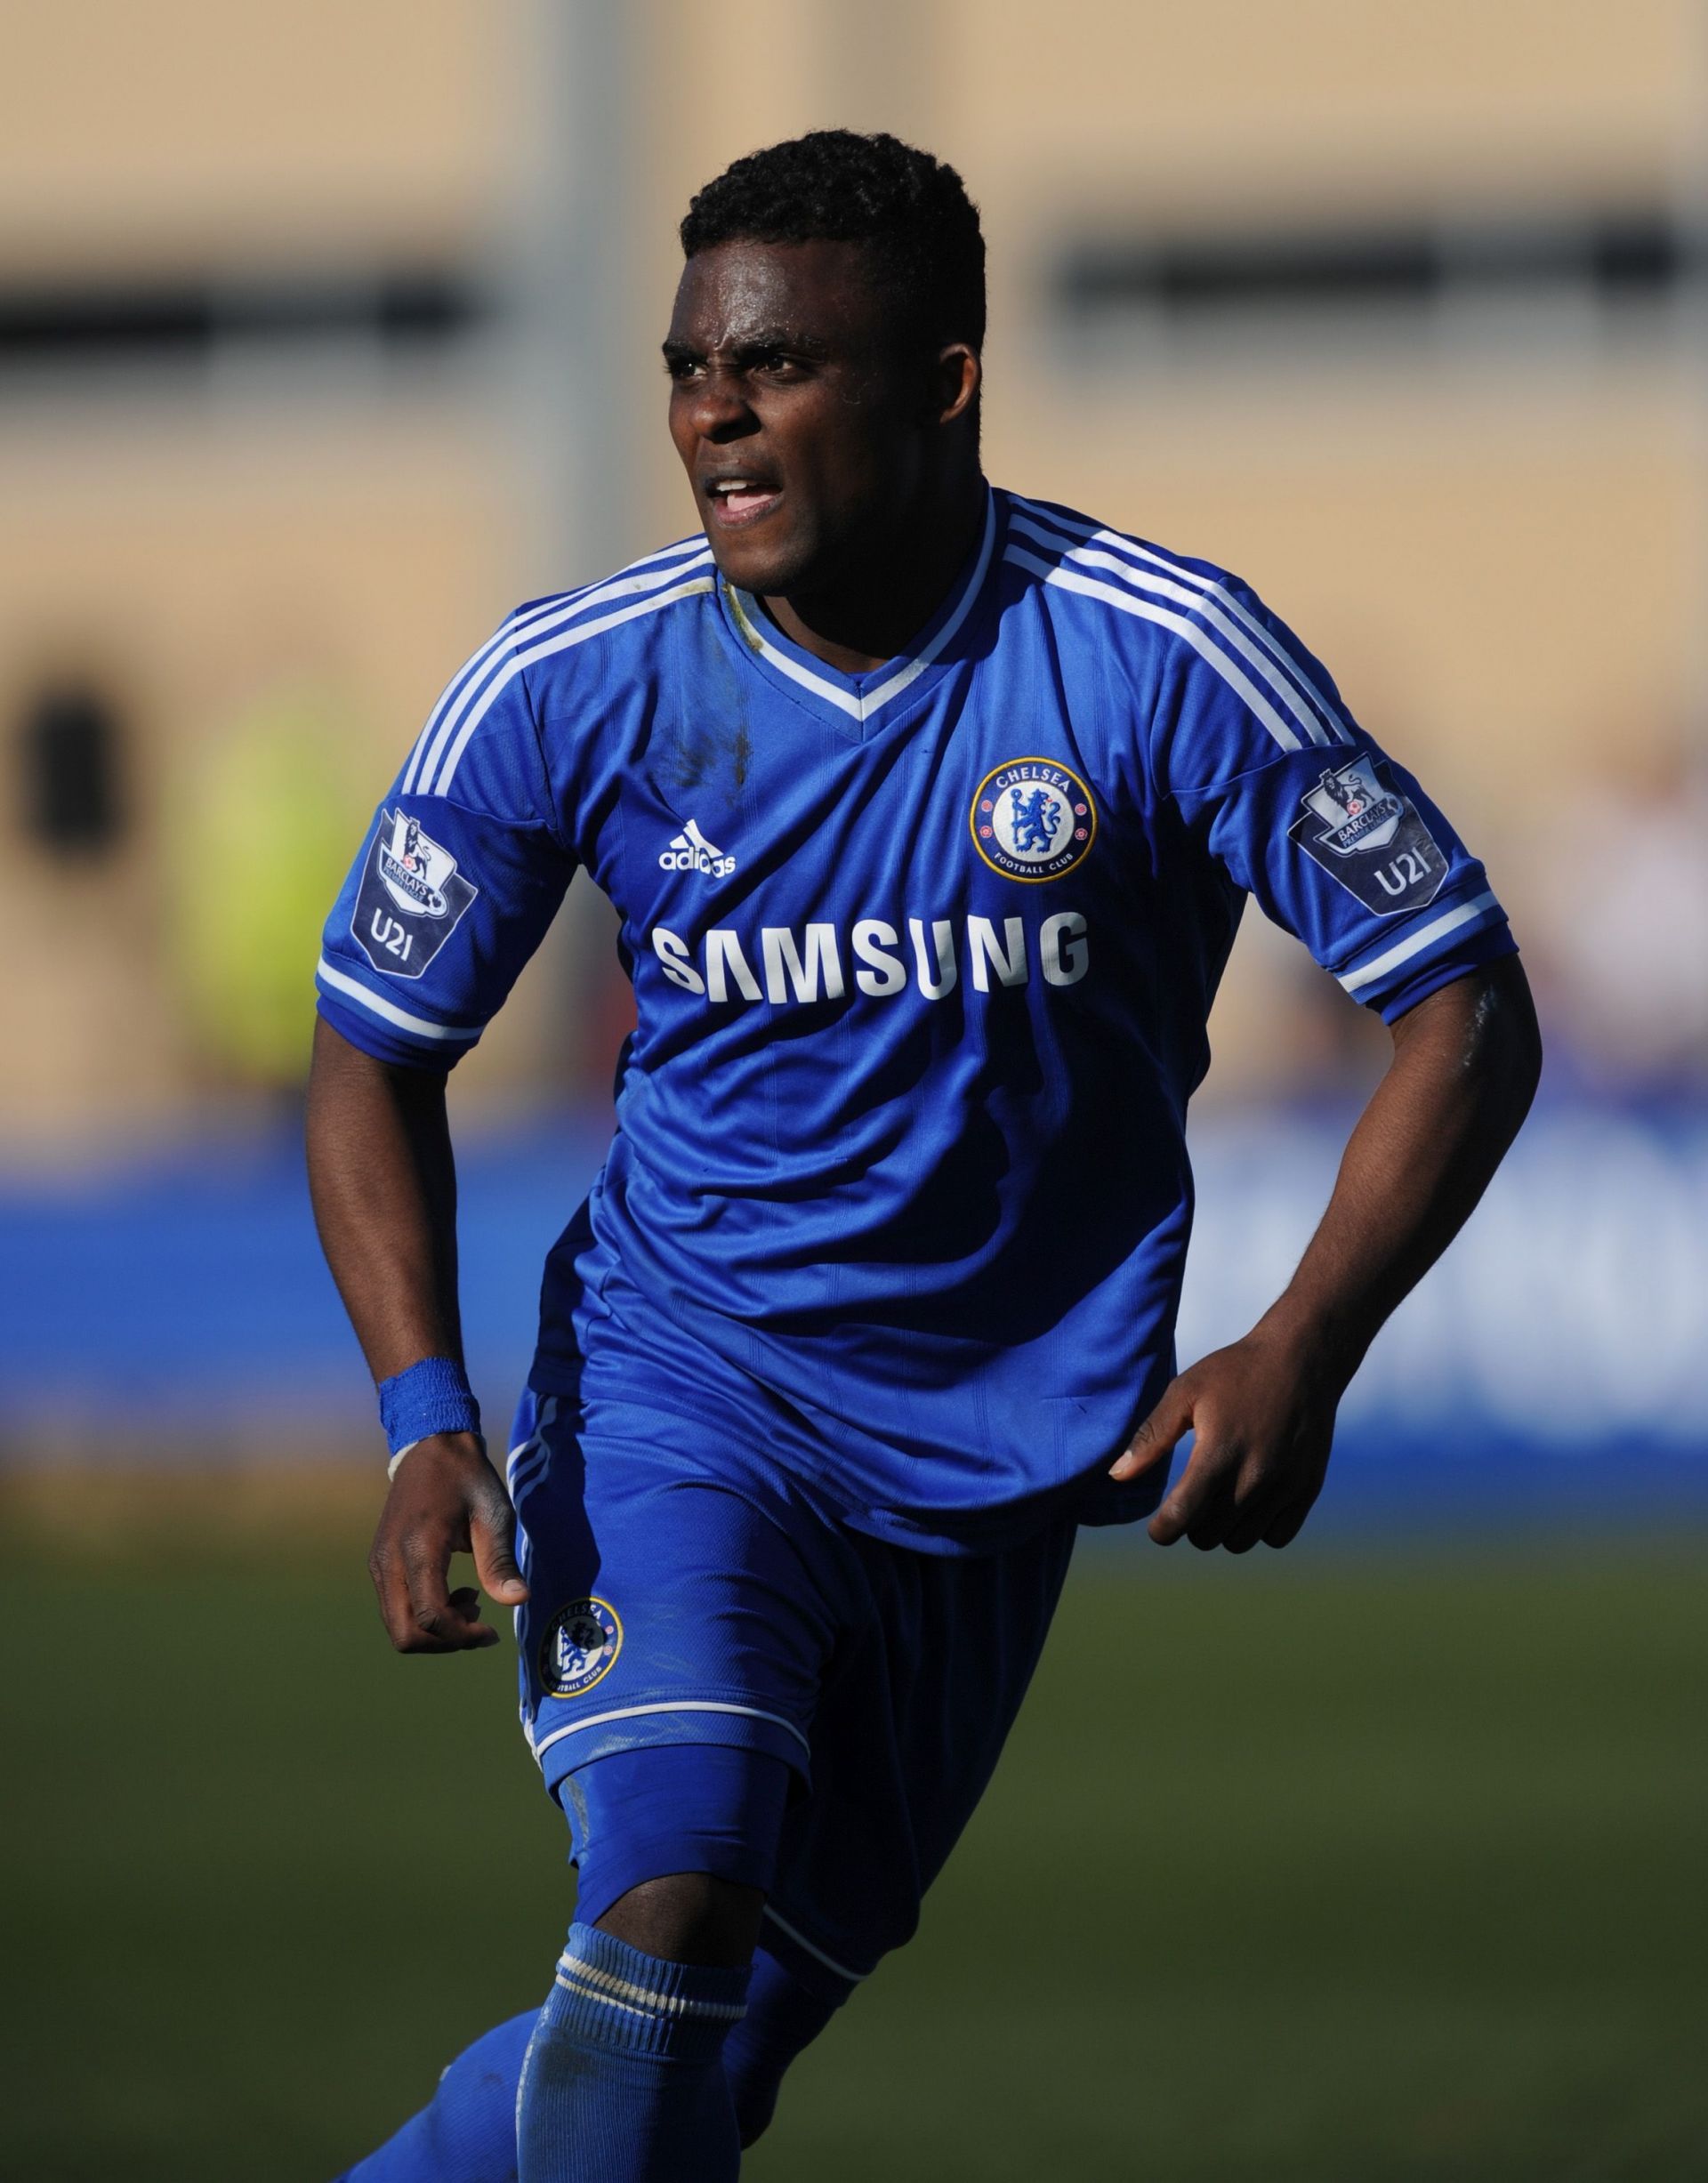 Islam Feruz was given his first team chance by Jose Mourinho